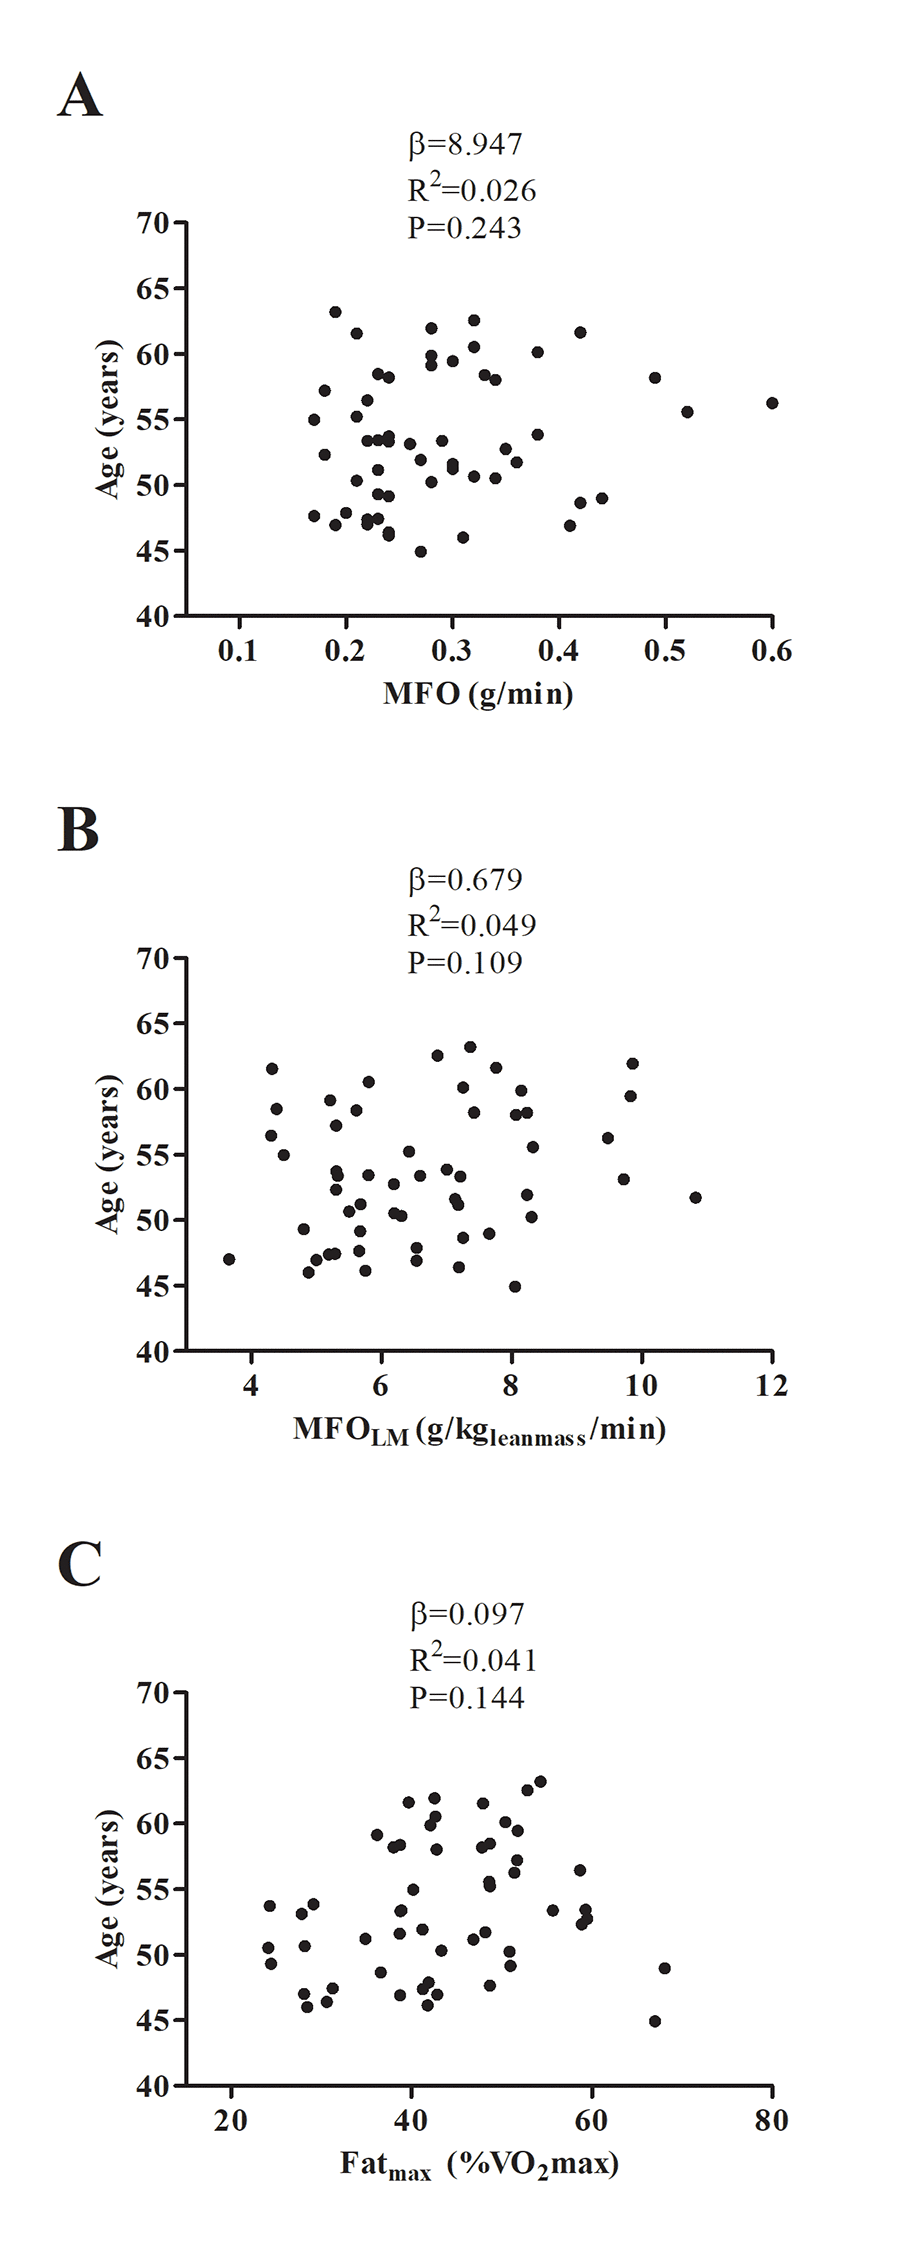 Association between maximal fat oxidation (MFO) (A, B), and the intensity of exercise that elicits MFO (Fatmax) (C) with age. β (unstandardized regression coefficient), R2 and P are from a simple linear regression analysis. Abbreviations: MFO; Maximal Fat Oxidation, MFOLM; Maximal Fat Oxidation relative to lean mass, Fatmax; Intensity of exercise that elicits MFO, VO2max; Maximal Oxygen Uptake.